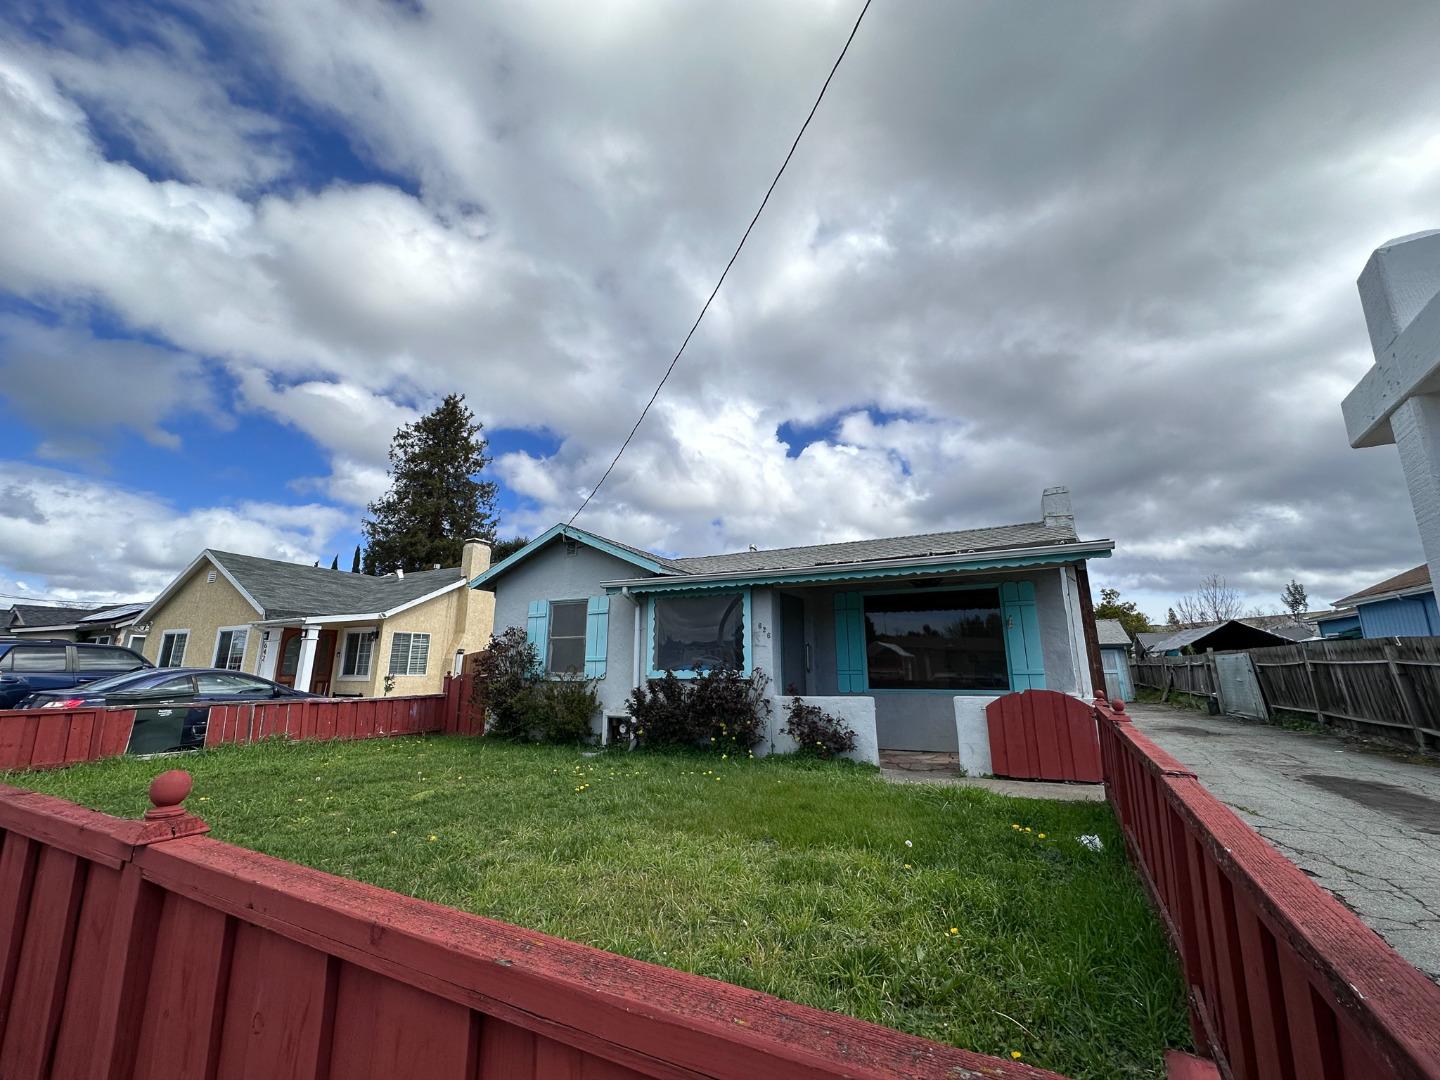 PRICE REDUCED! FIXER UPPER! Located in desirable Redwood City location. Calling all contractors and investors, don't miss out on this opportunity!  This 2 bed, 1 ba home is situated on a 6000+/-  s.f. lot. Plenty of potential to expand or possibly build an ADU.  Detached 2 car garage with workshop area.